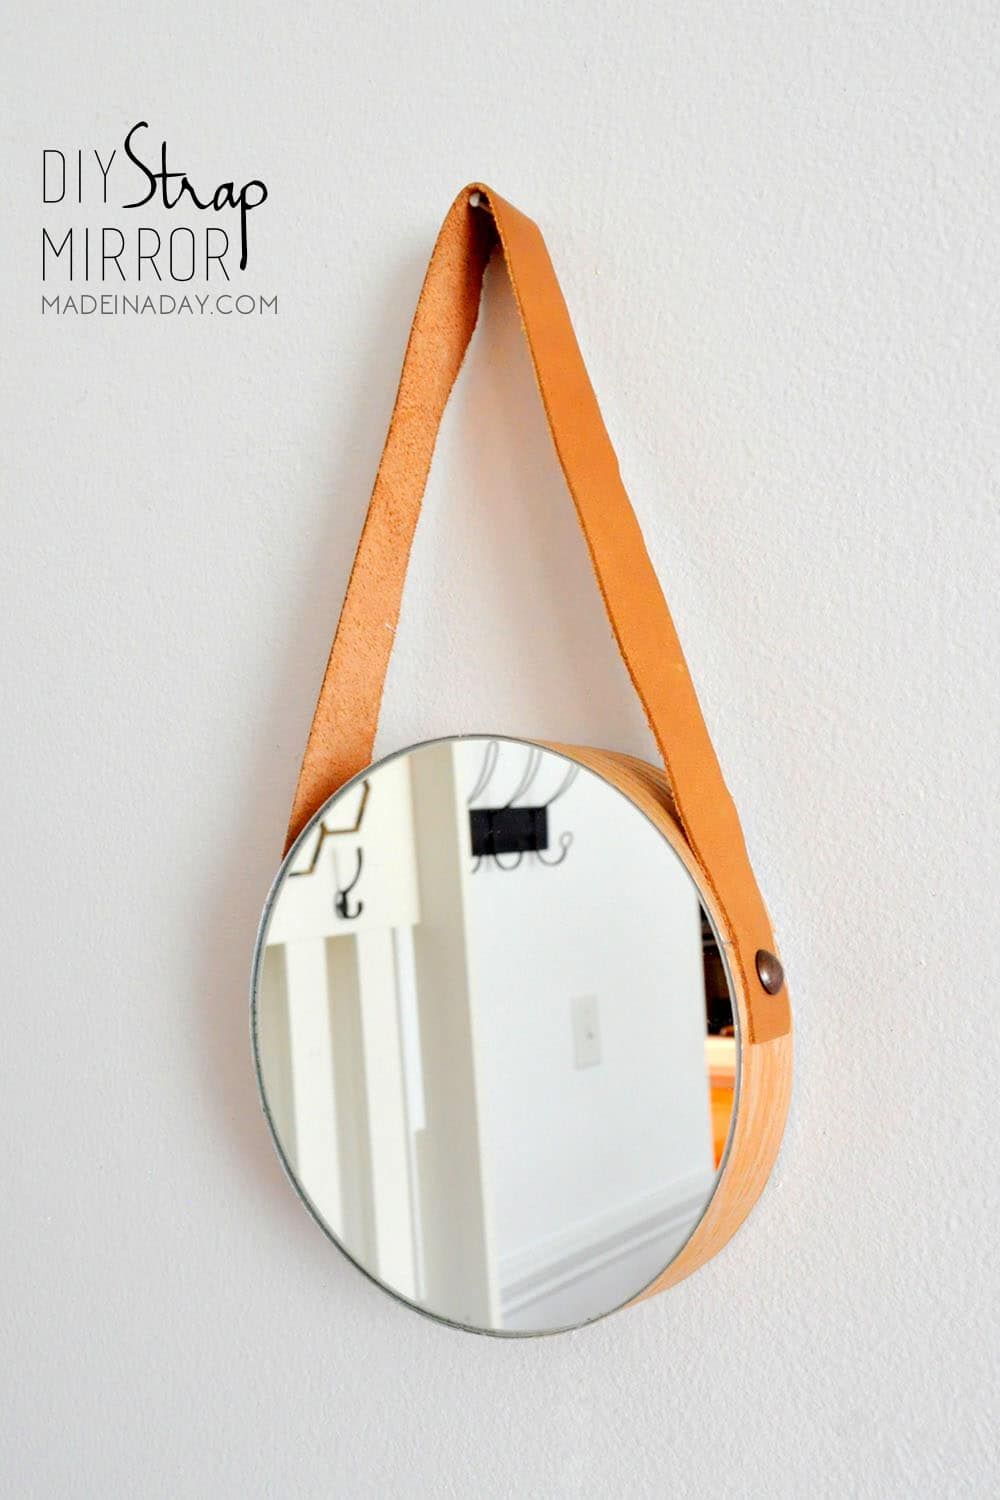 Diy Wood Leather Strap Mirror Inside Black Leather Strap Wall Mirrors (View 11 of 15)